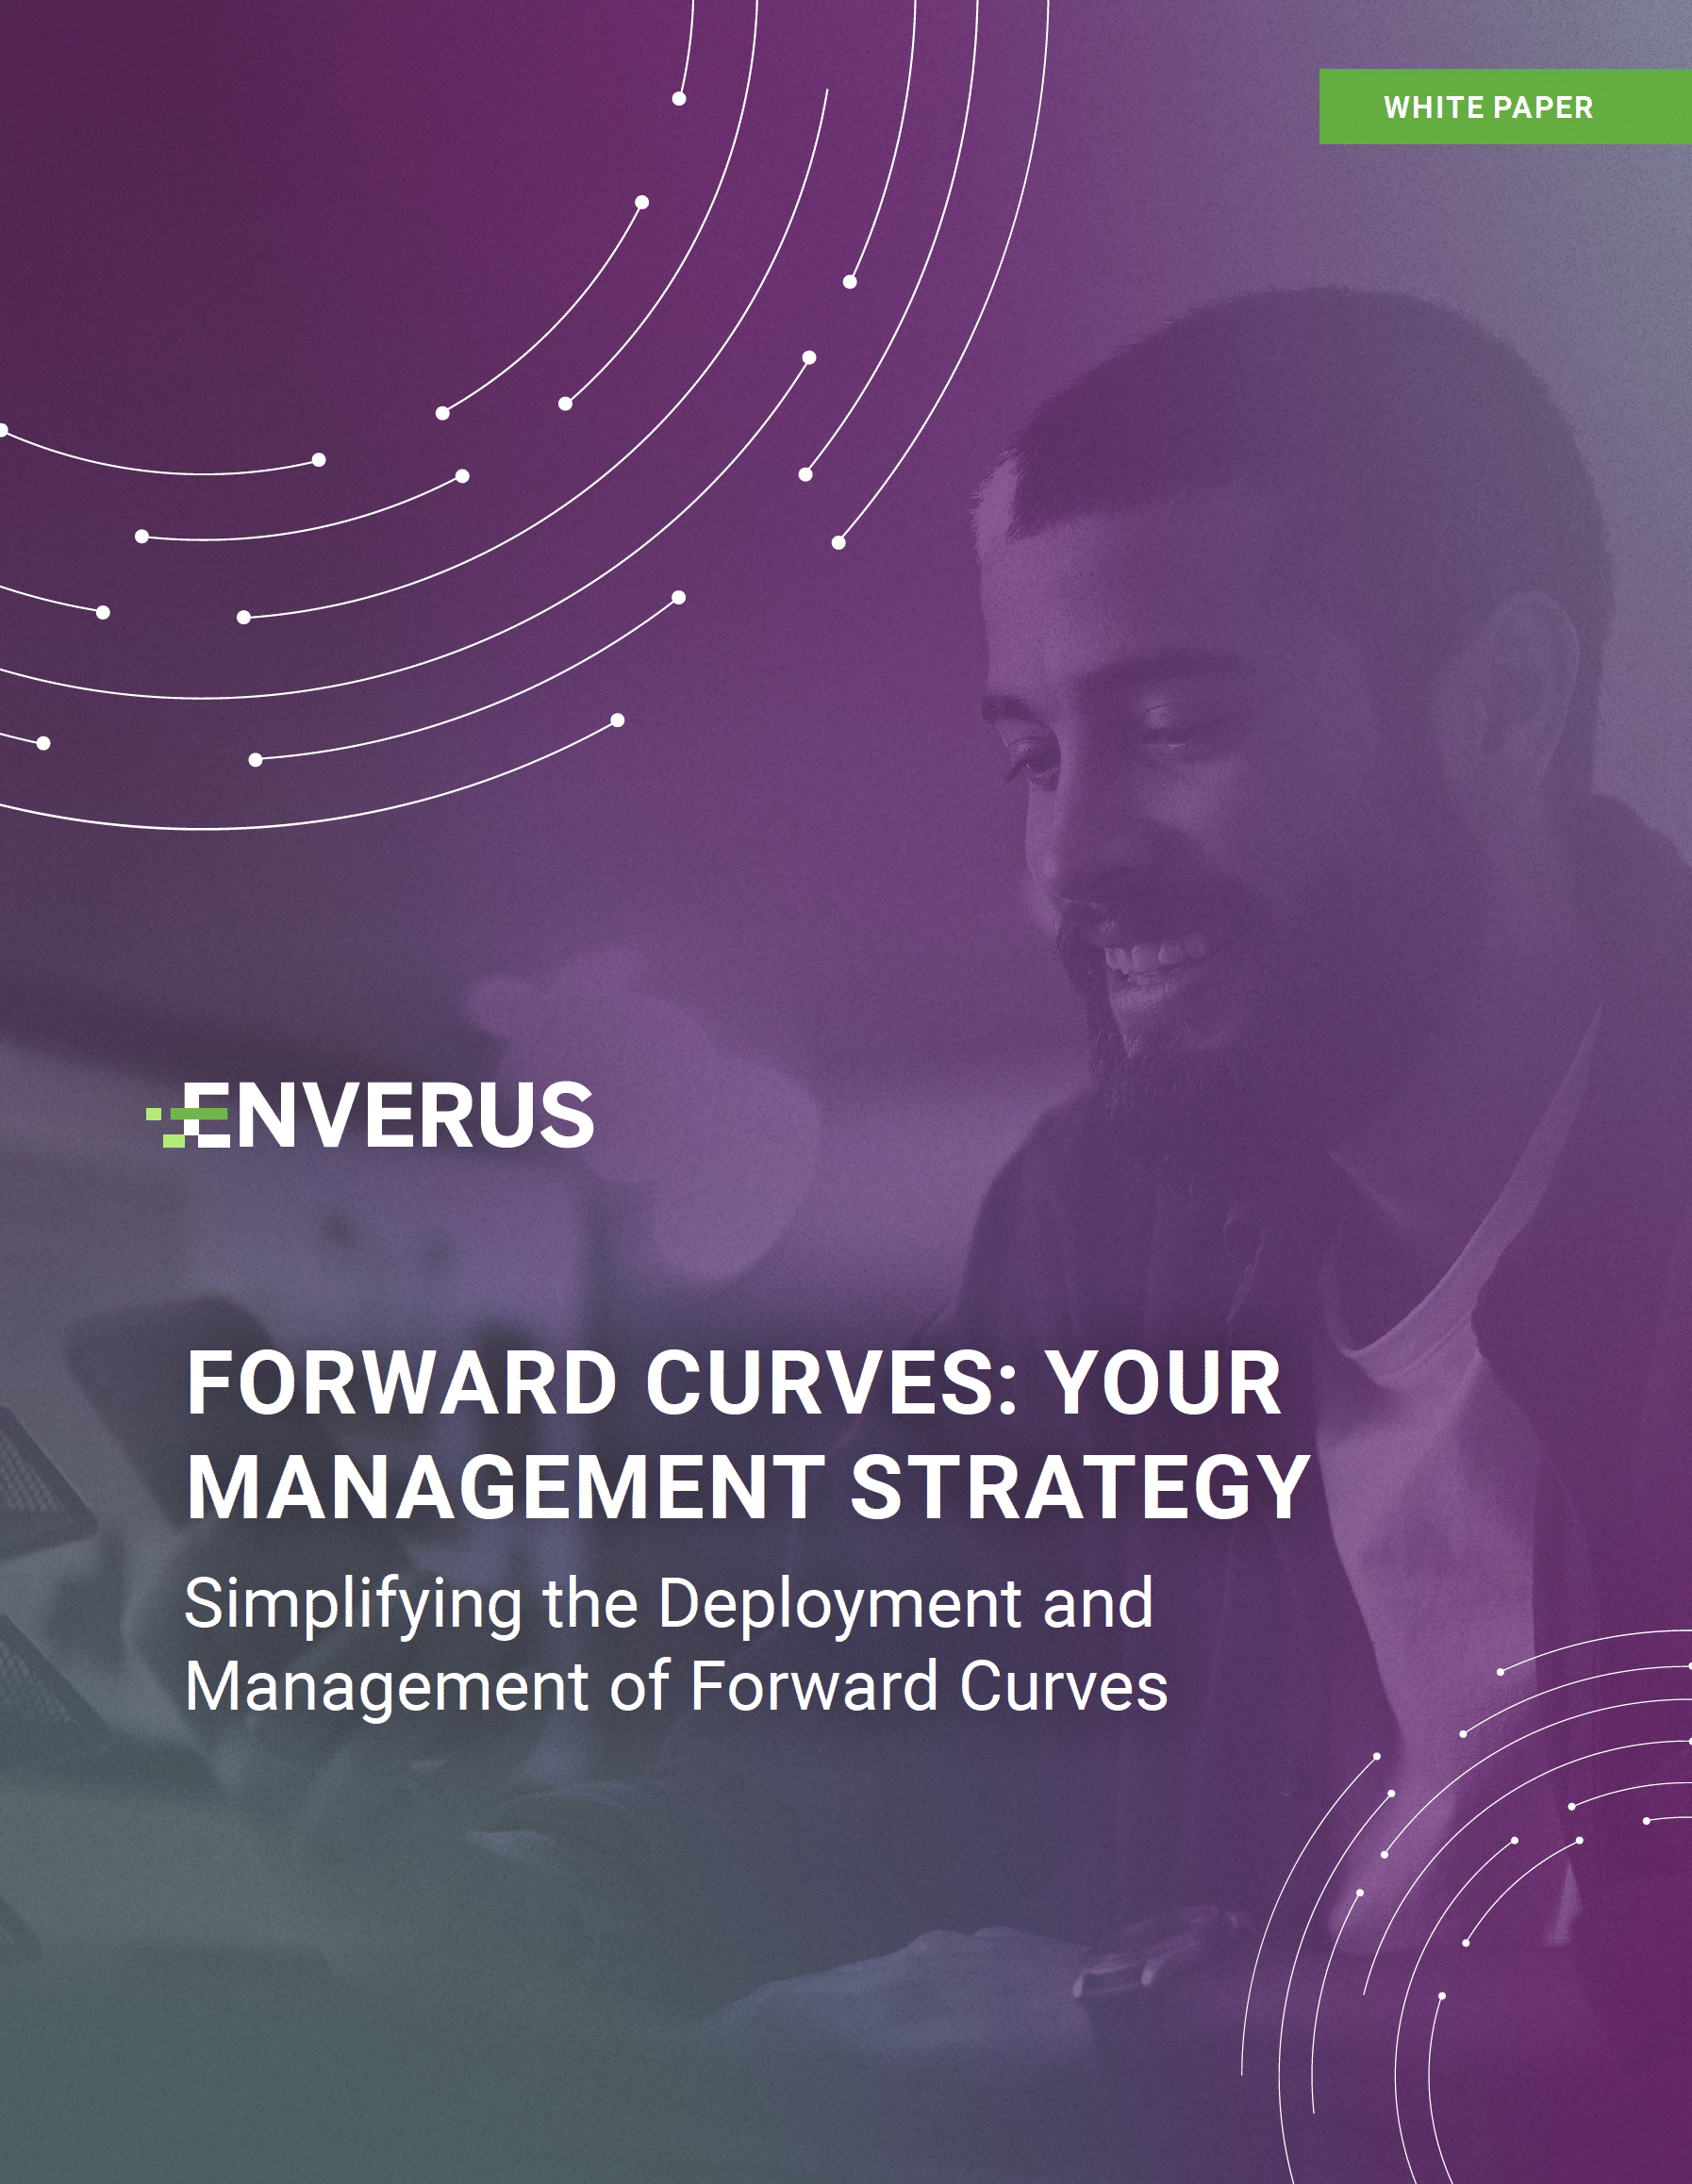 FORWARD CURVES: YOUR MANAGEMENT STRATEGY Simplifying the Deployment and Management of Forward Curves